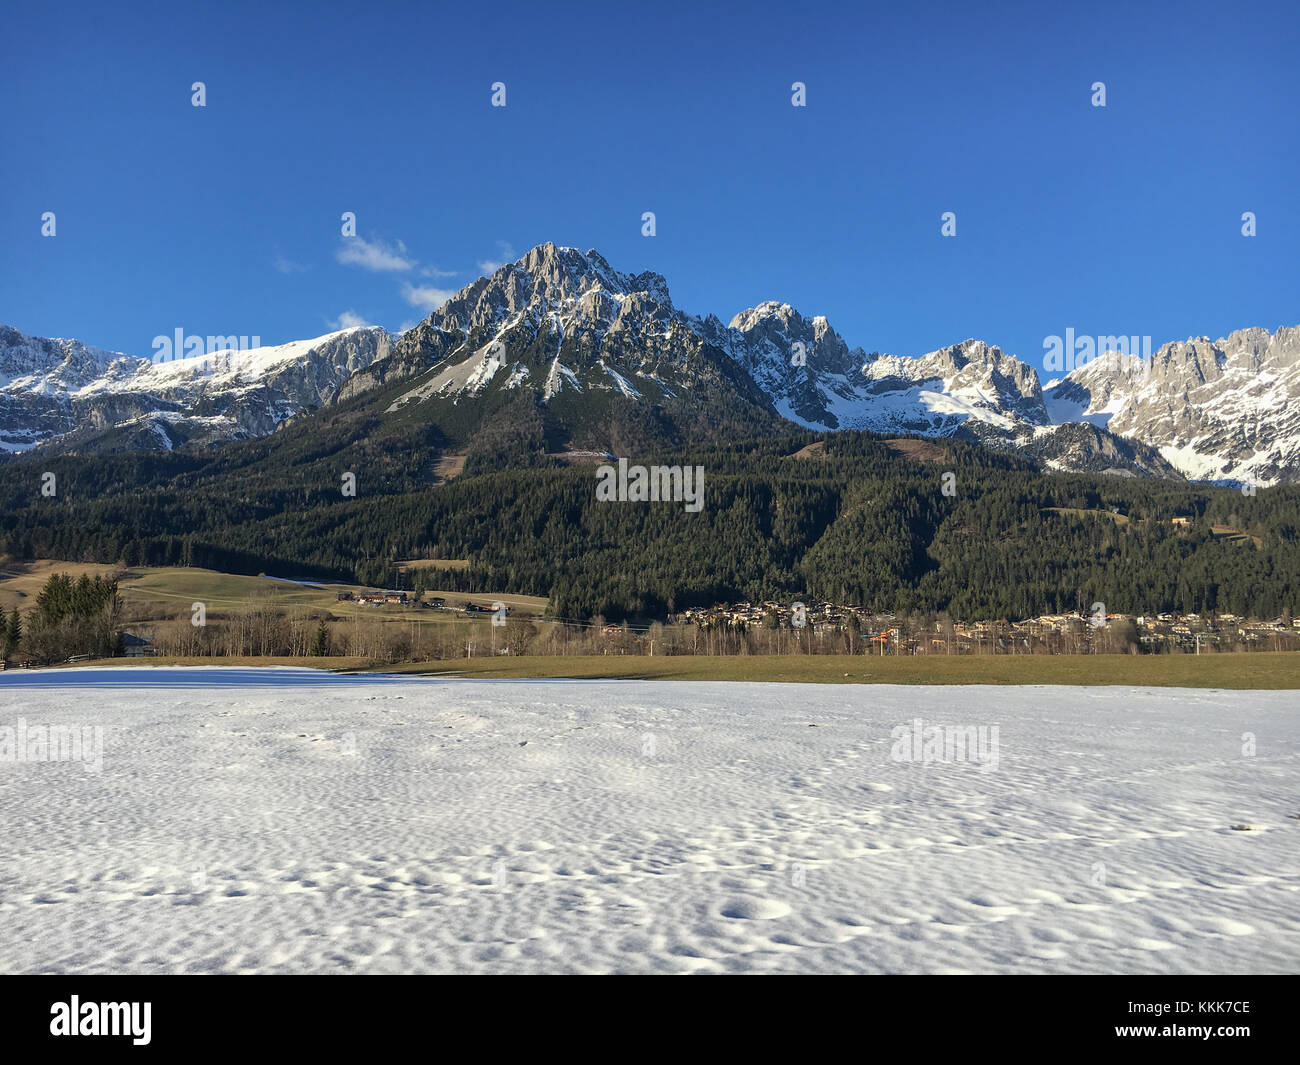 Ellmau and beautiful mountain range (Kaiser Mountains) in front of a blue sky at Wilder Kaiser region in Tyrol, Austria Stock Photo